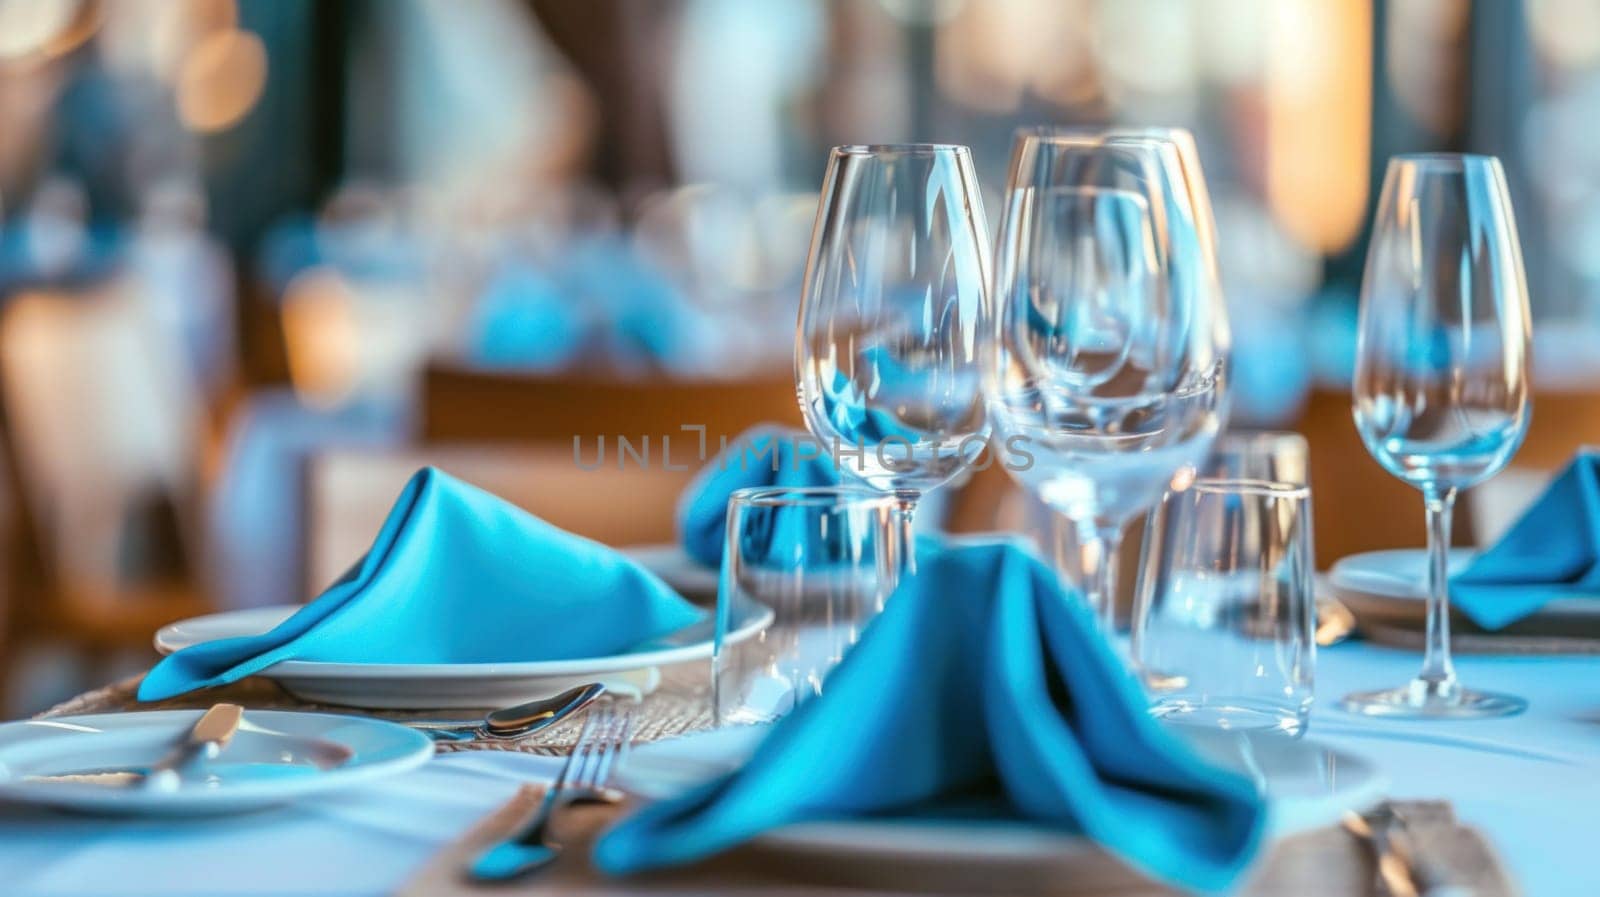 Elegant table setting with blue napkins and wine glasses for a sophisticated dinner event or celebration